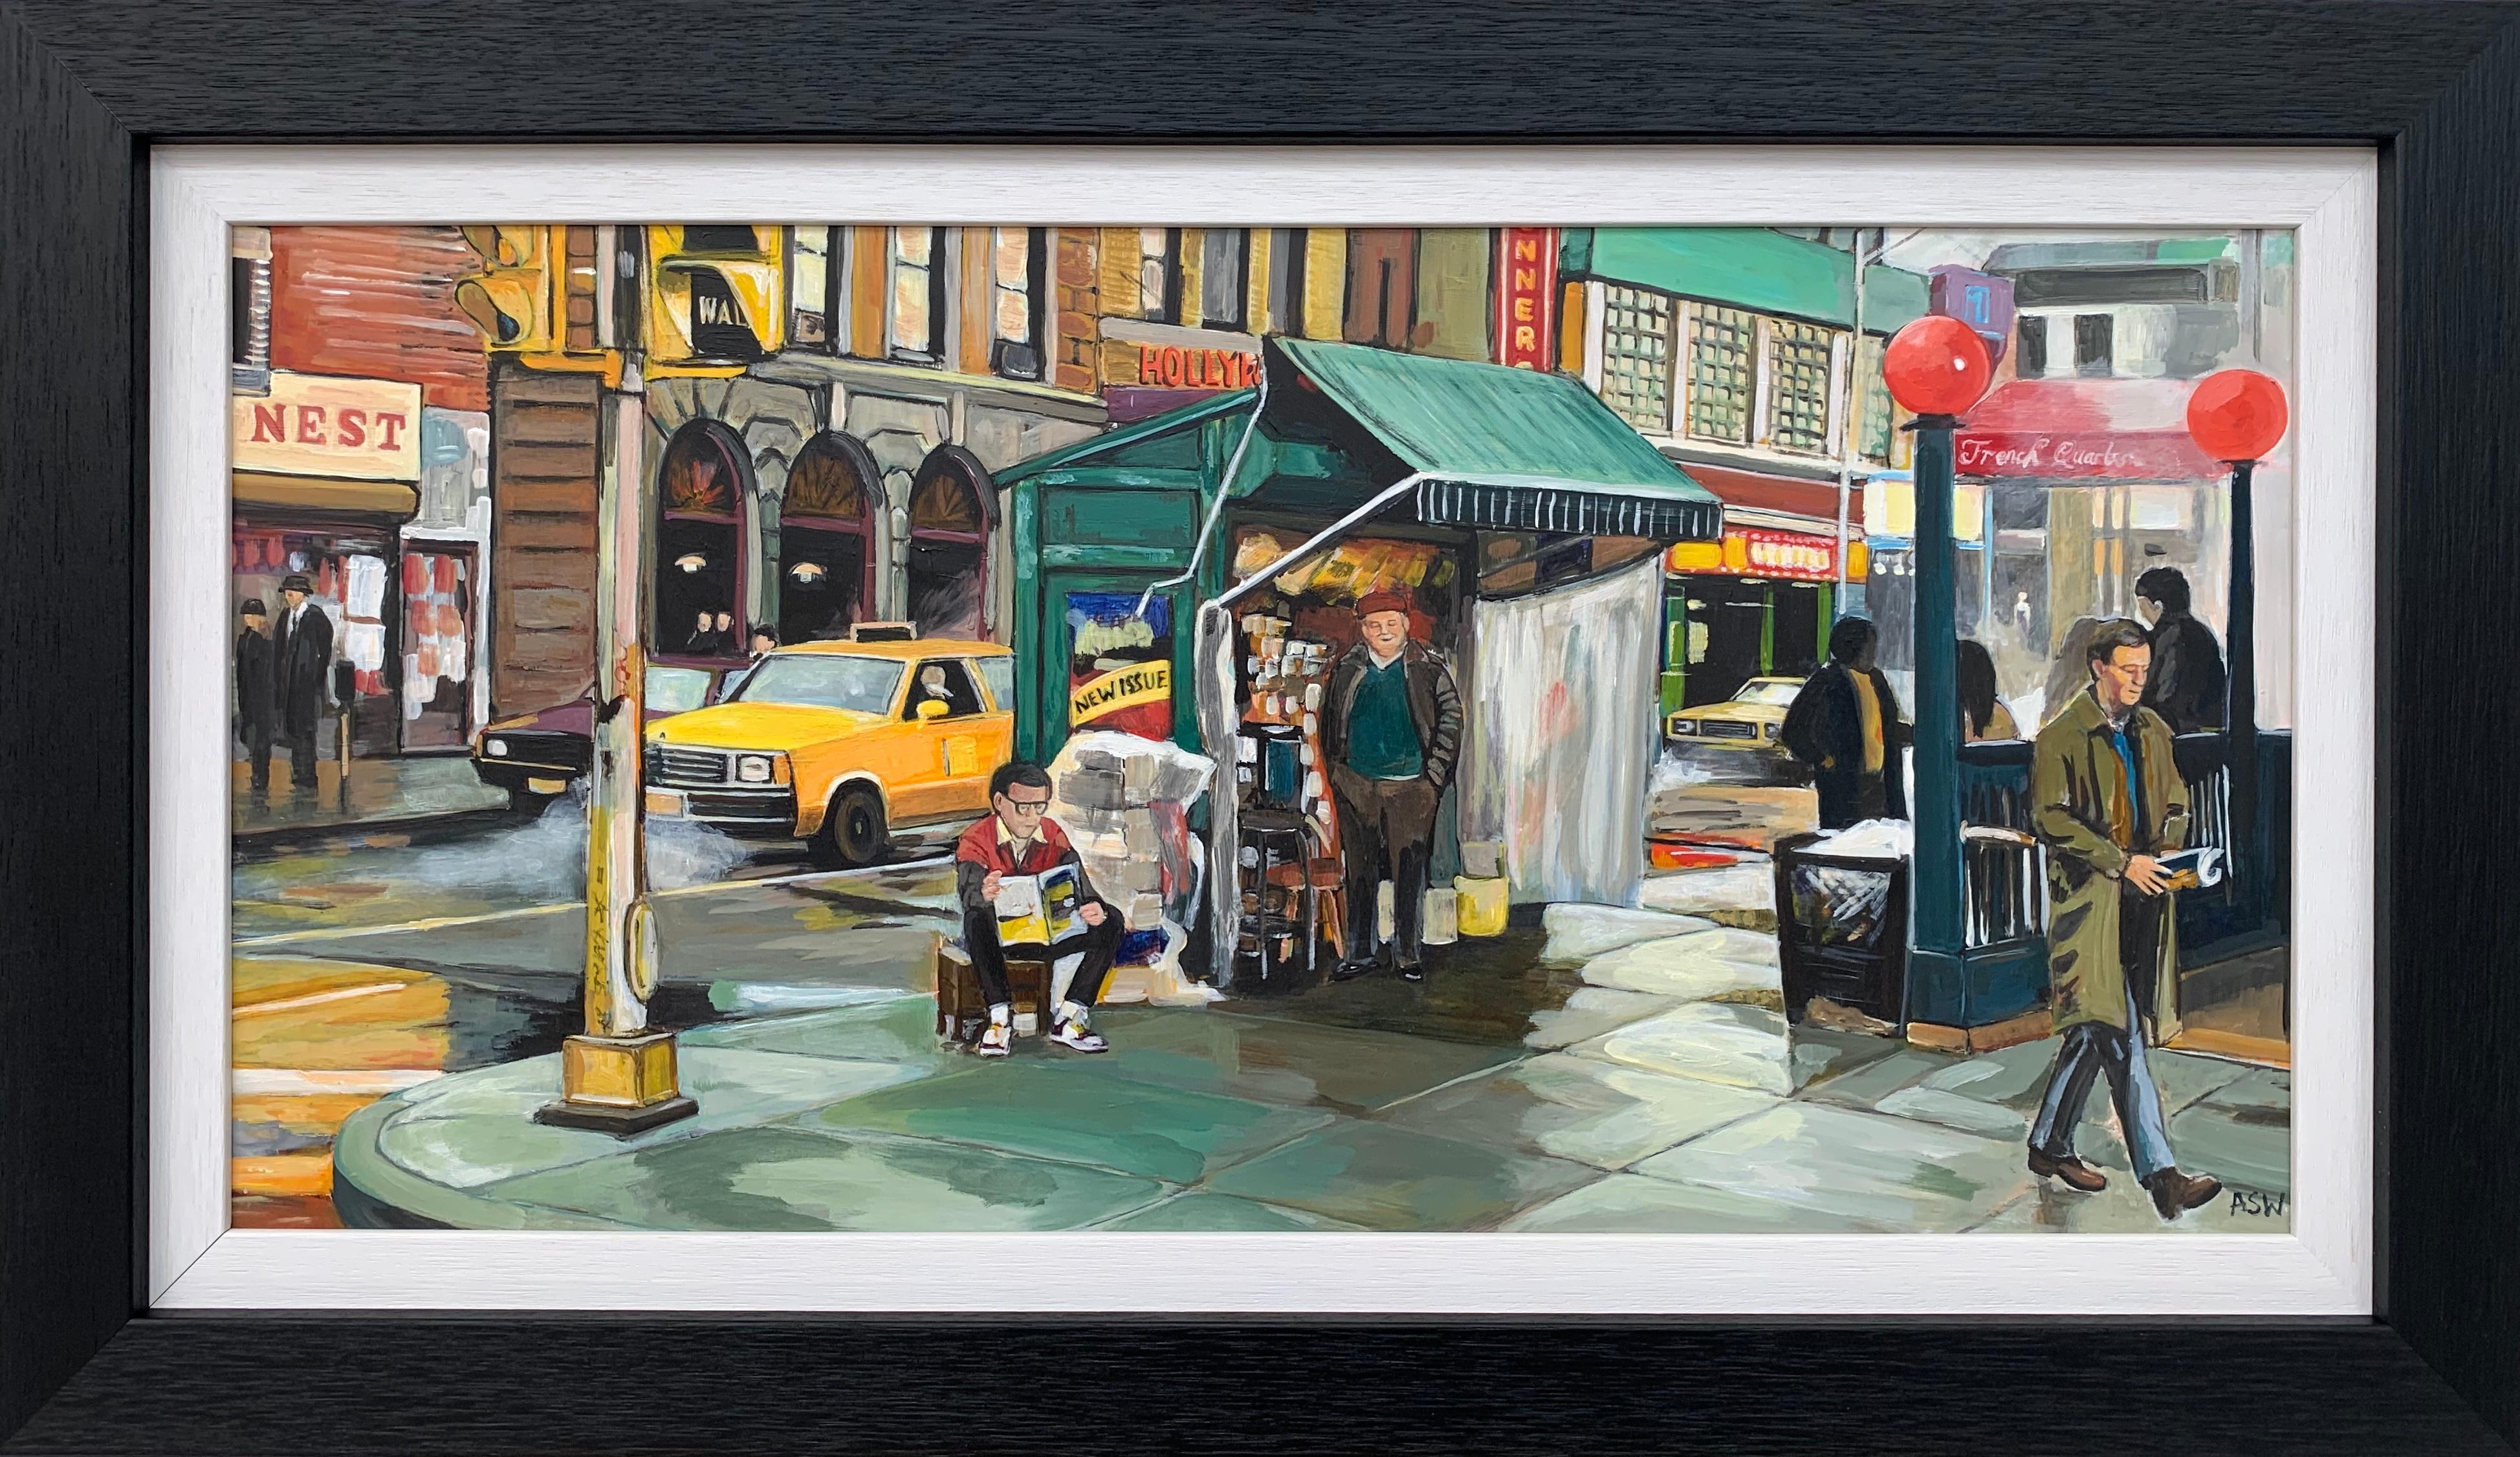 Angela Wakefield Landscape Painting - New York City Street Scene Painting by Leading British Contemporary Artist